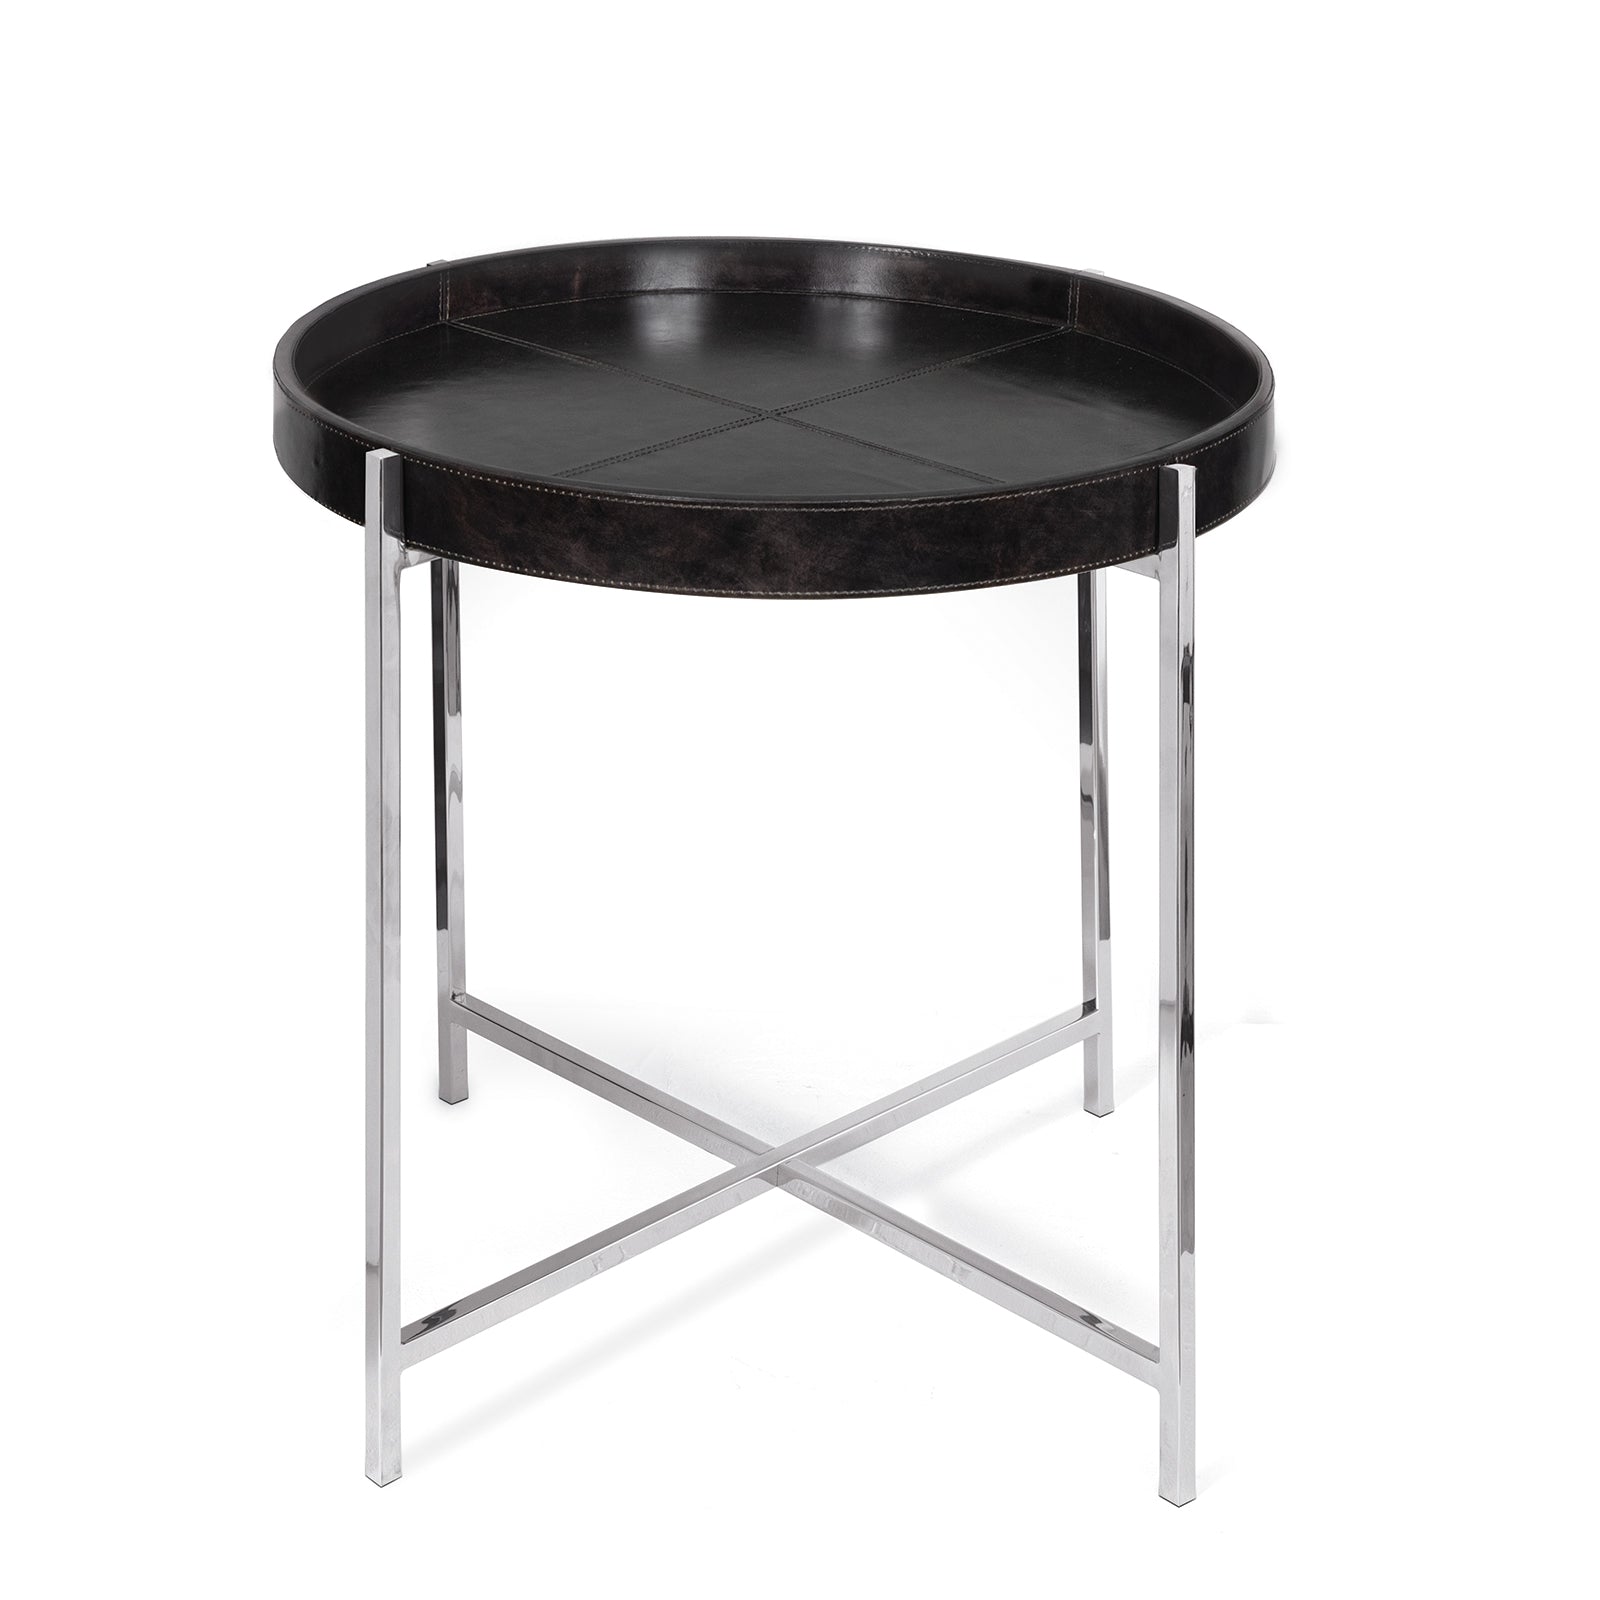 Derby Leather Tray Table in Black by Regina Andrew